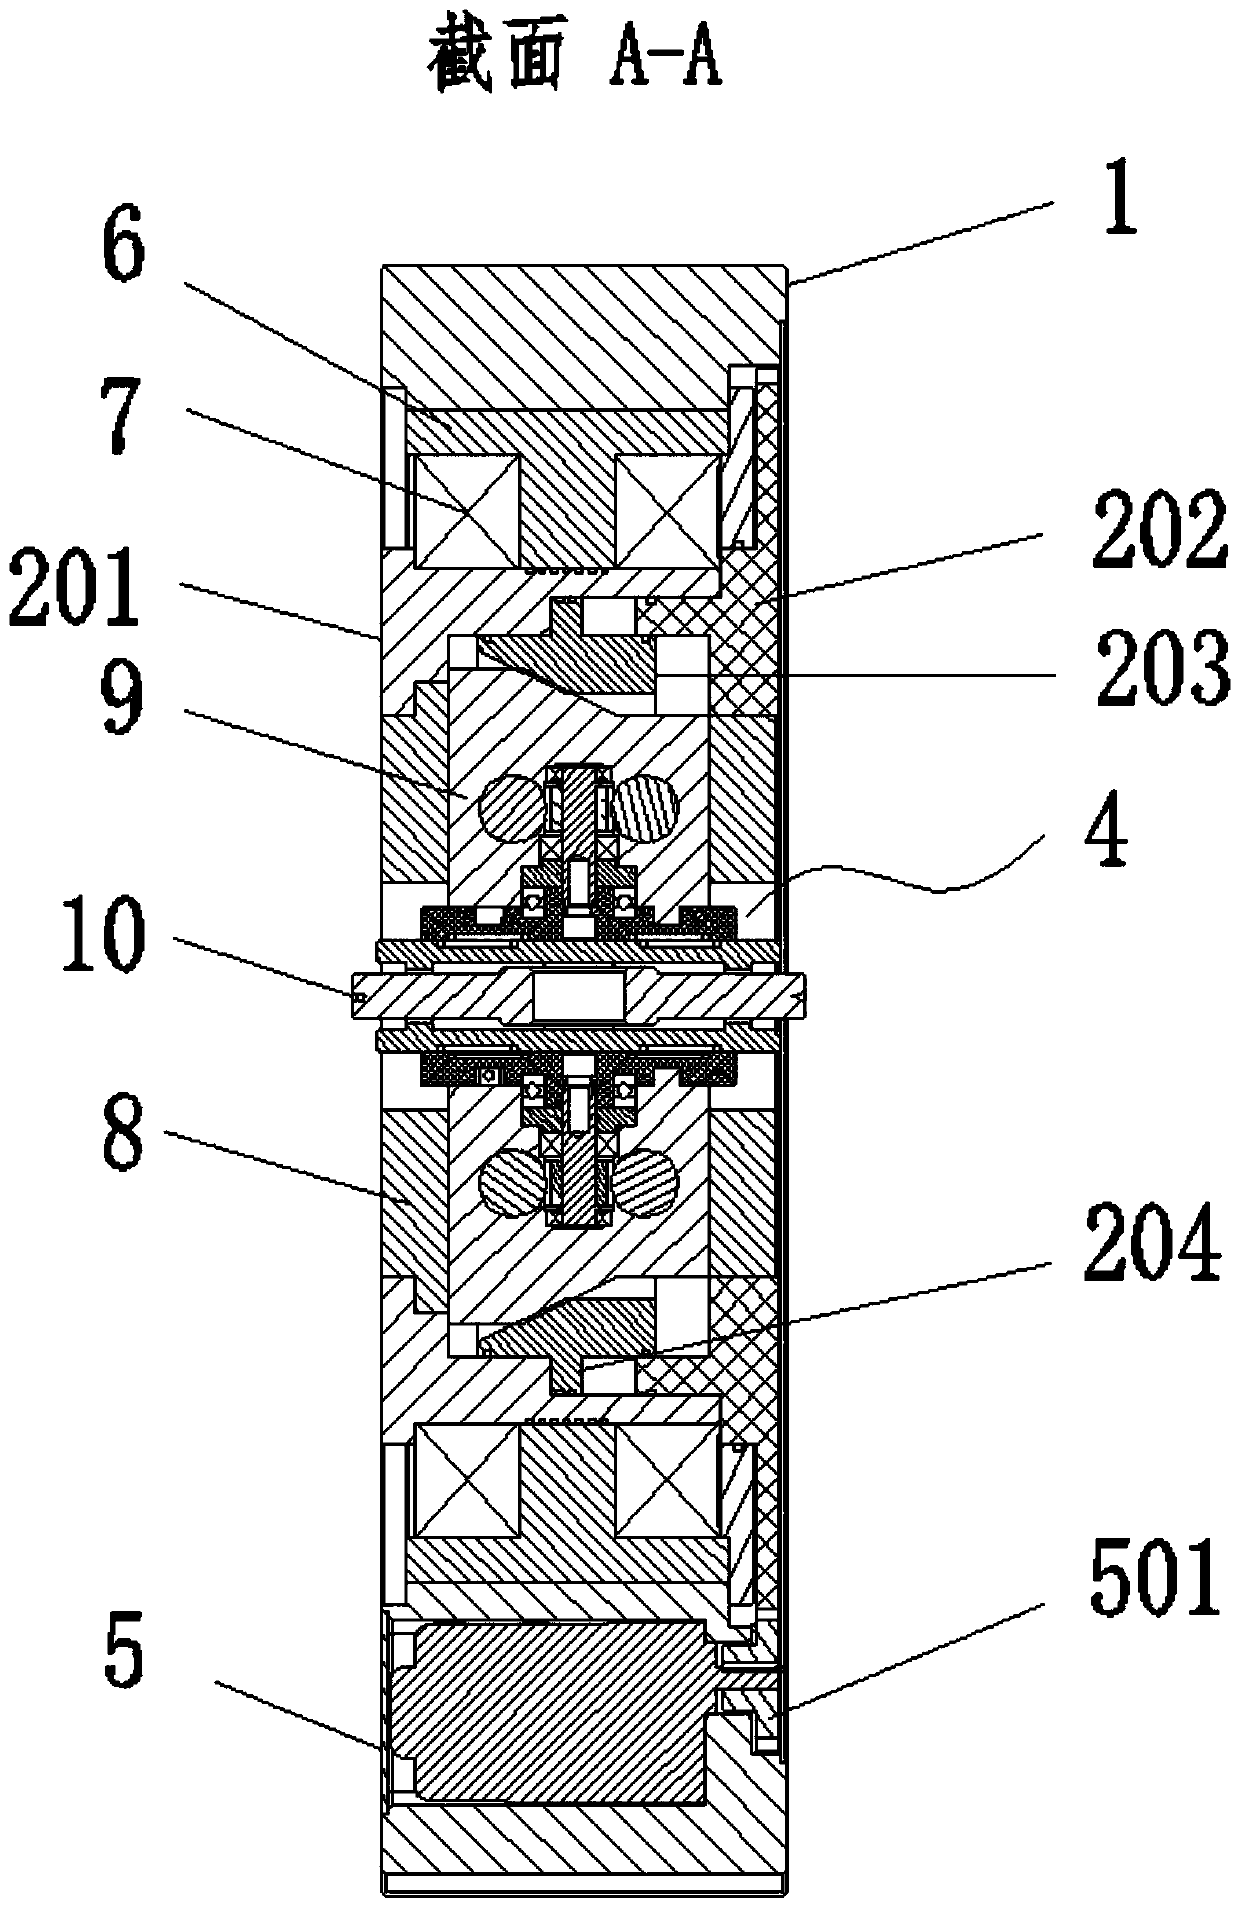 A self-centering two-way rotating cross-axis machining spindle